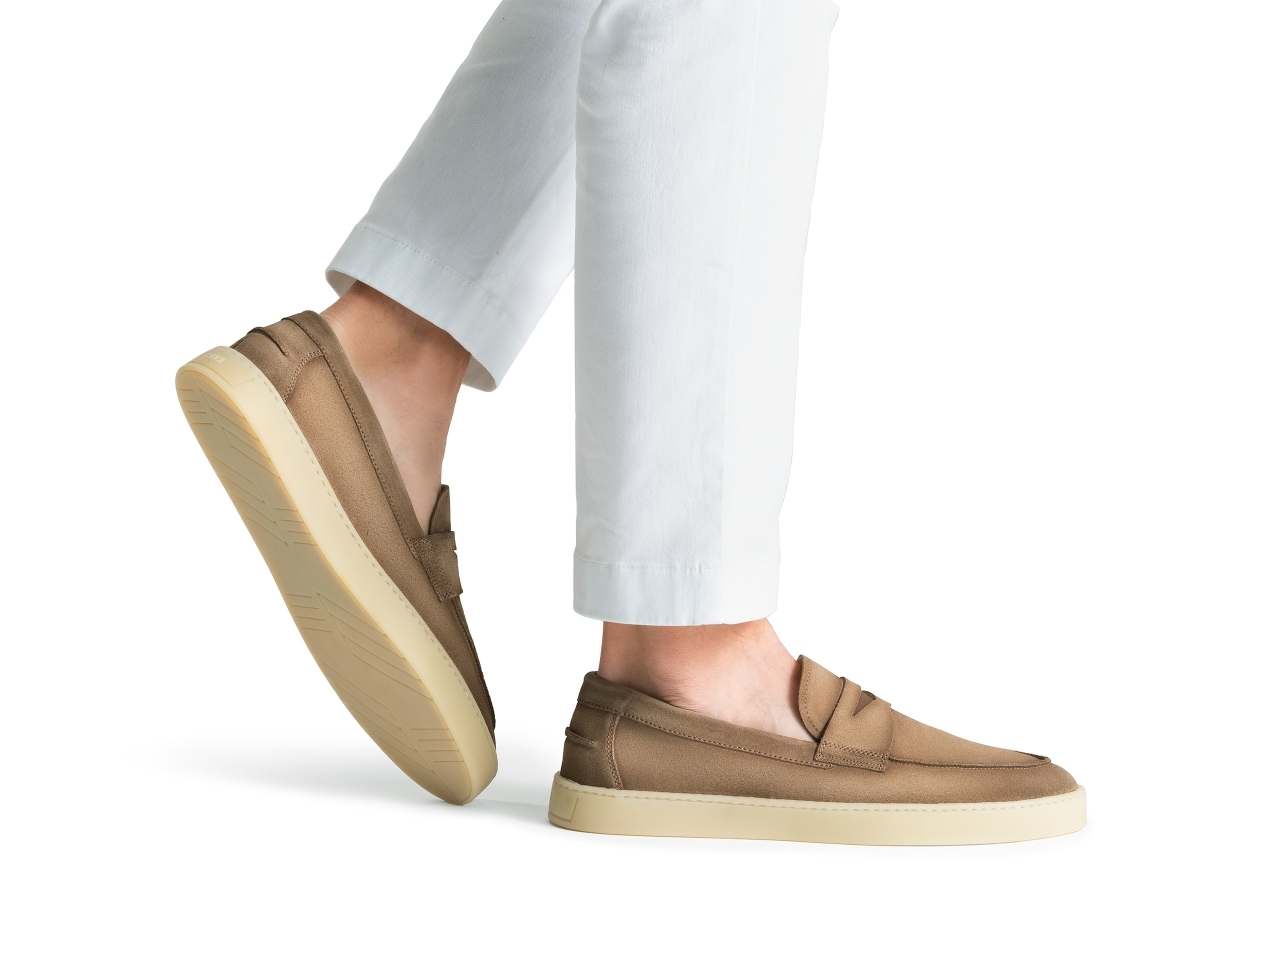 The Lawford FLX Taupe Suede pairs well with light colored pants